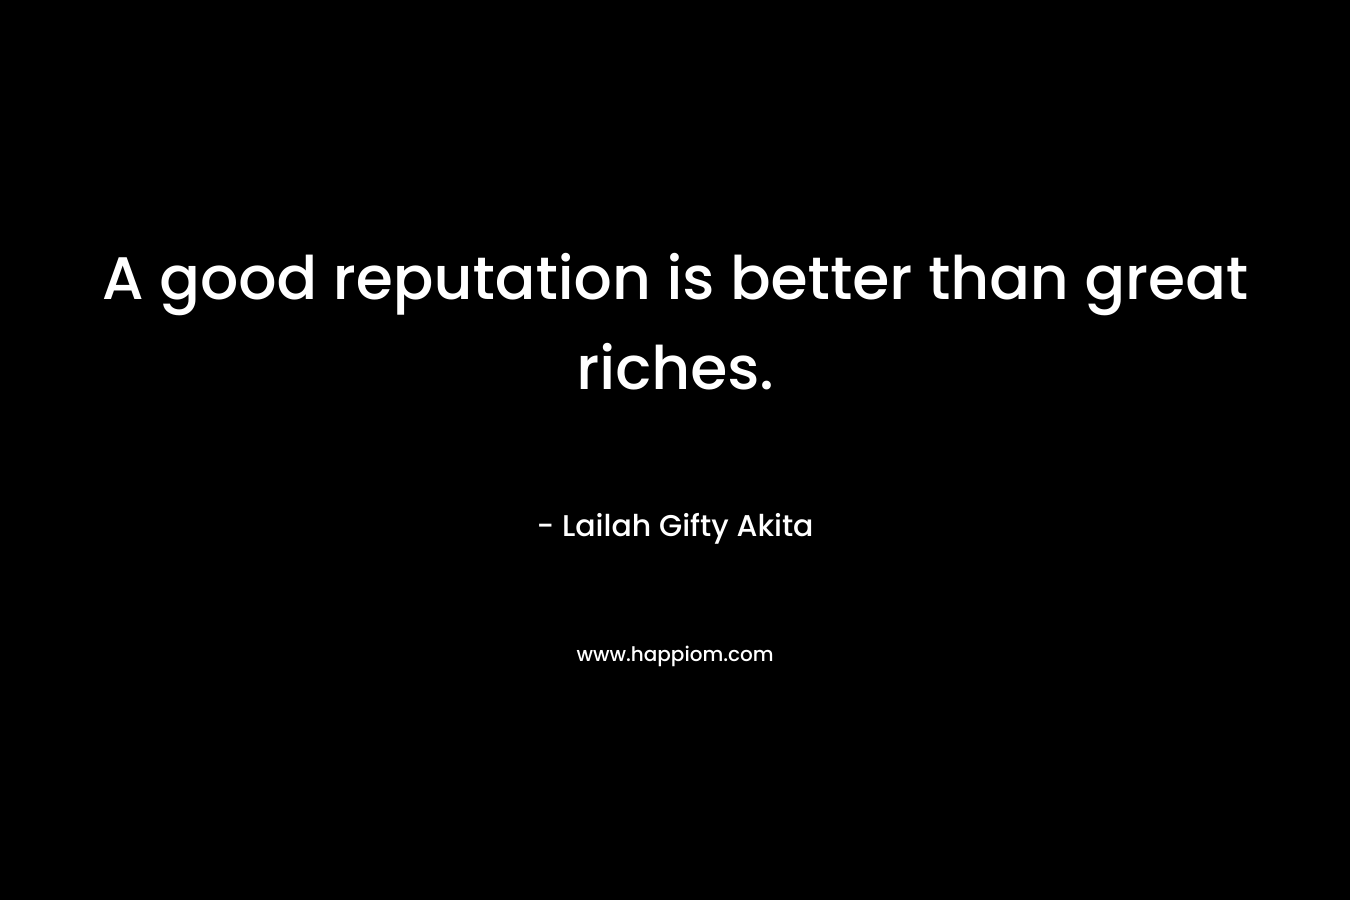 A good reputation is better than great riches.